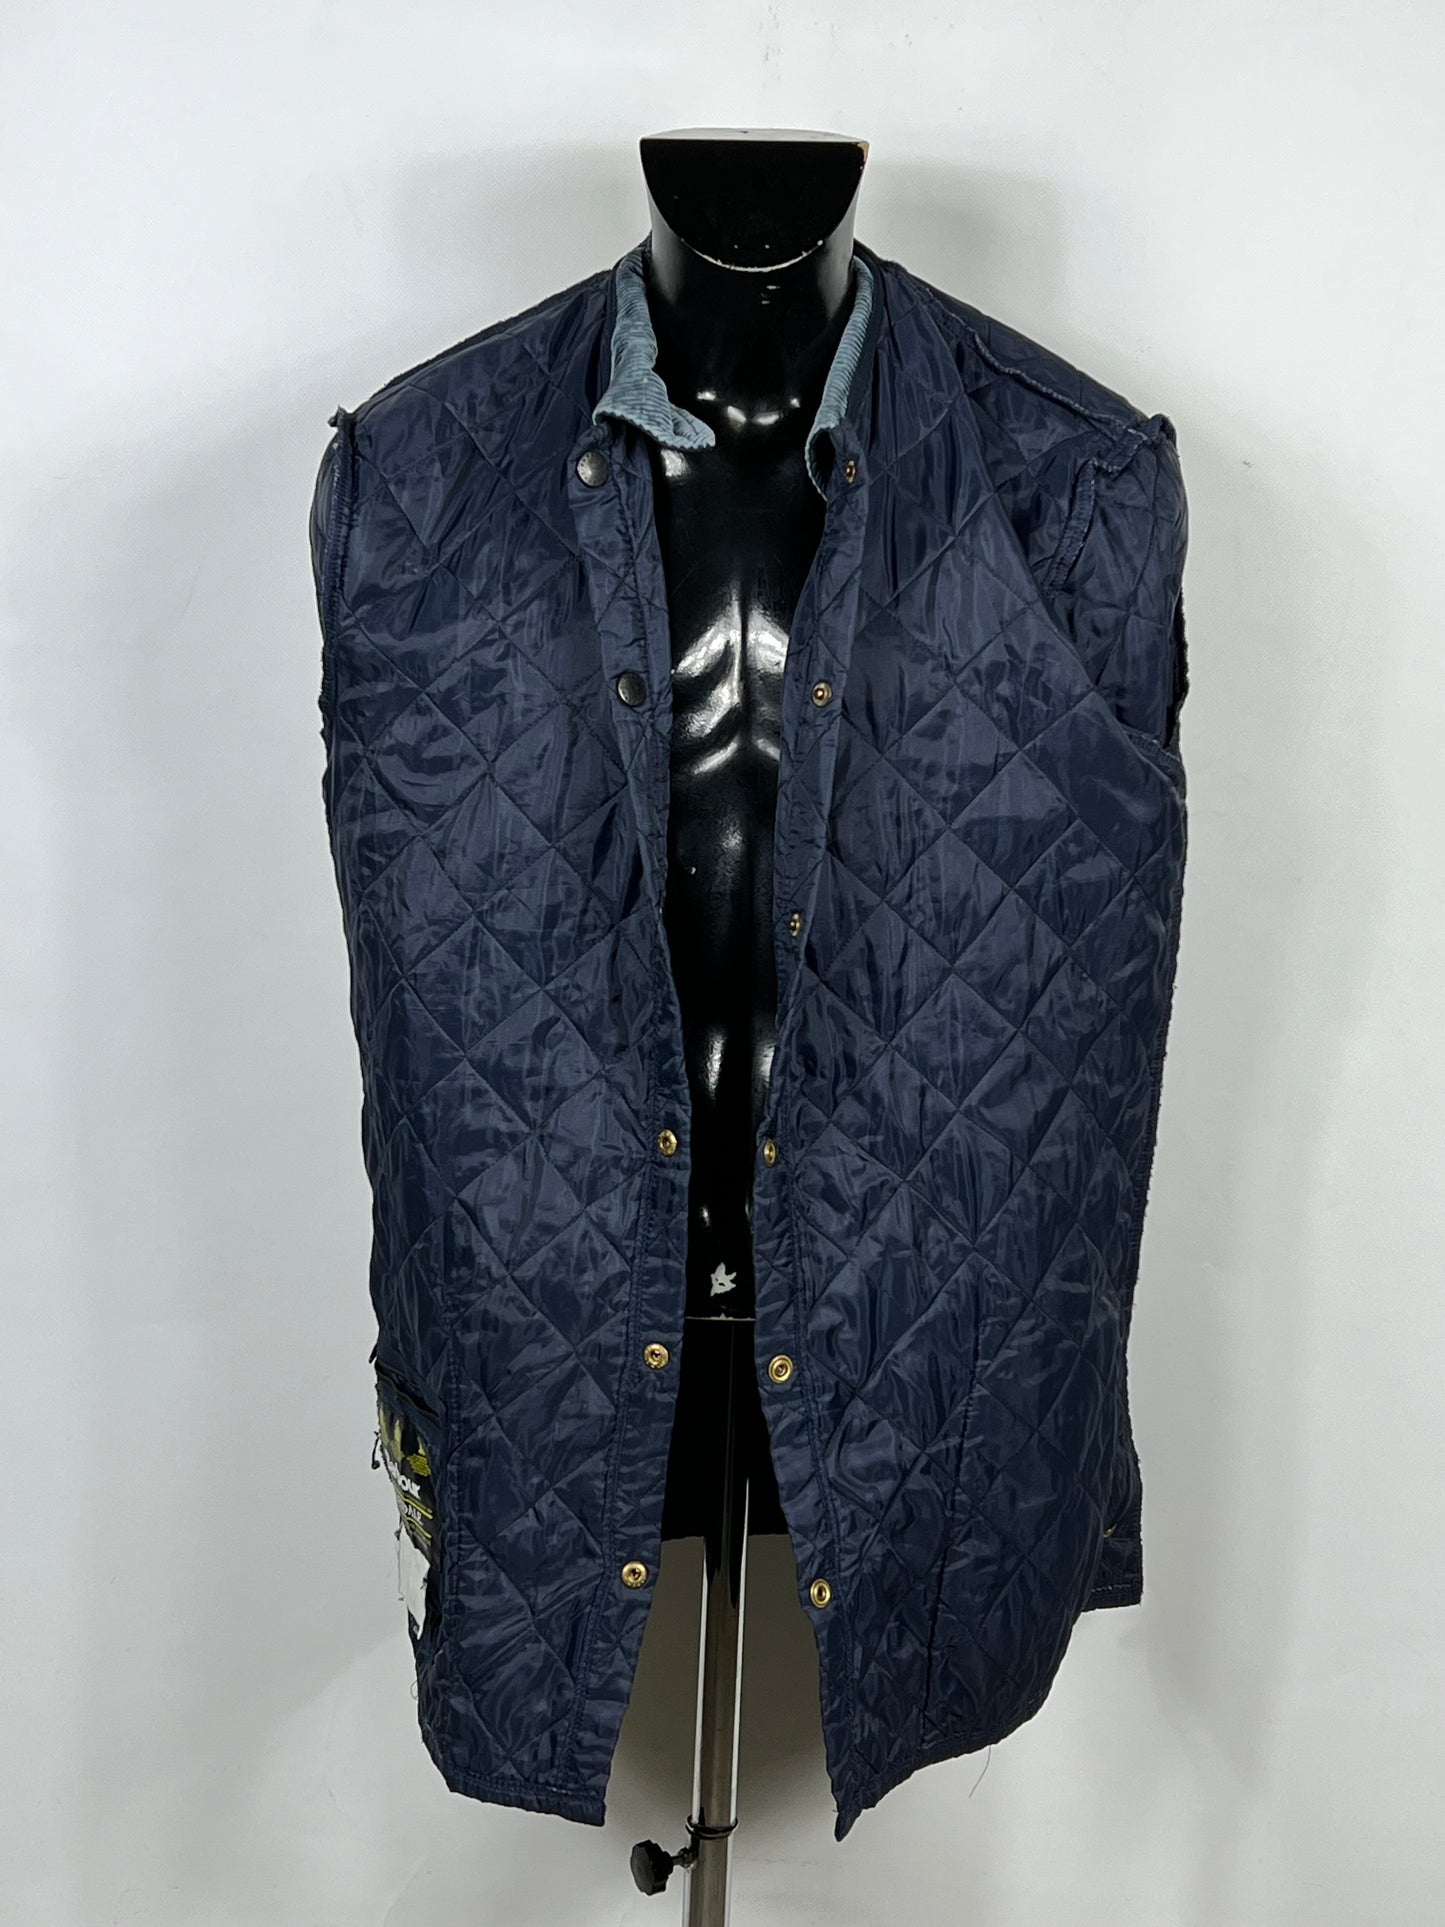 Giacca Barbour a vento Liddesdale anni 90 blu Medium Quilted Navy Man jacket size M